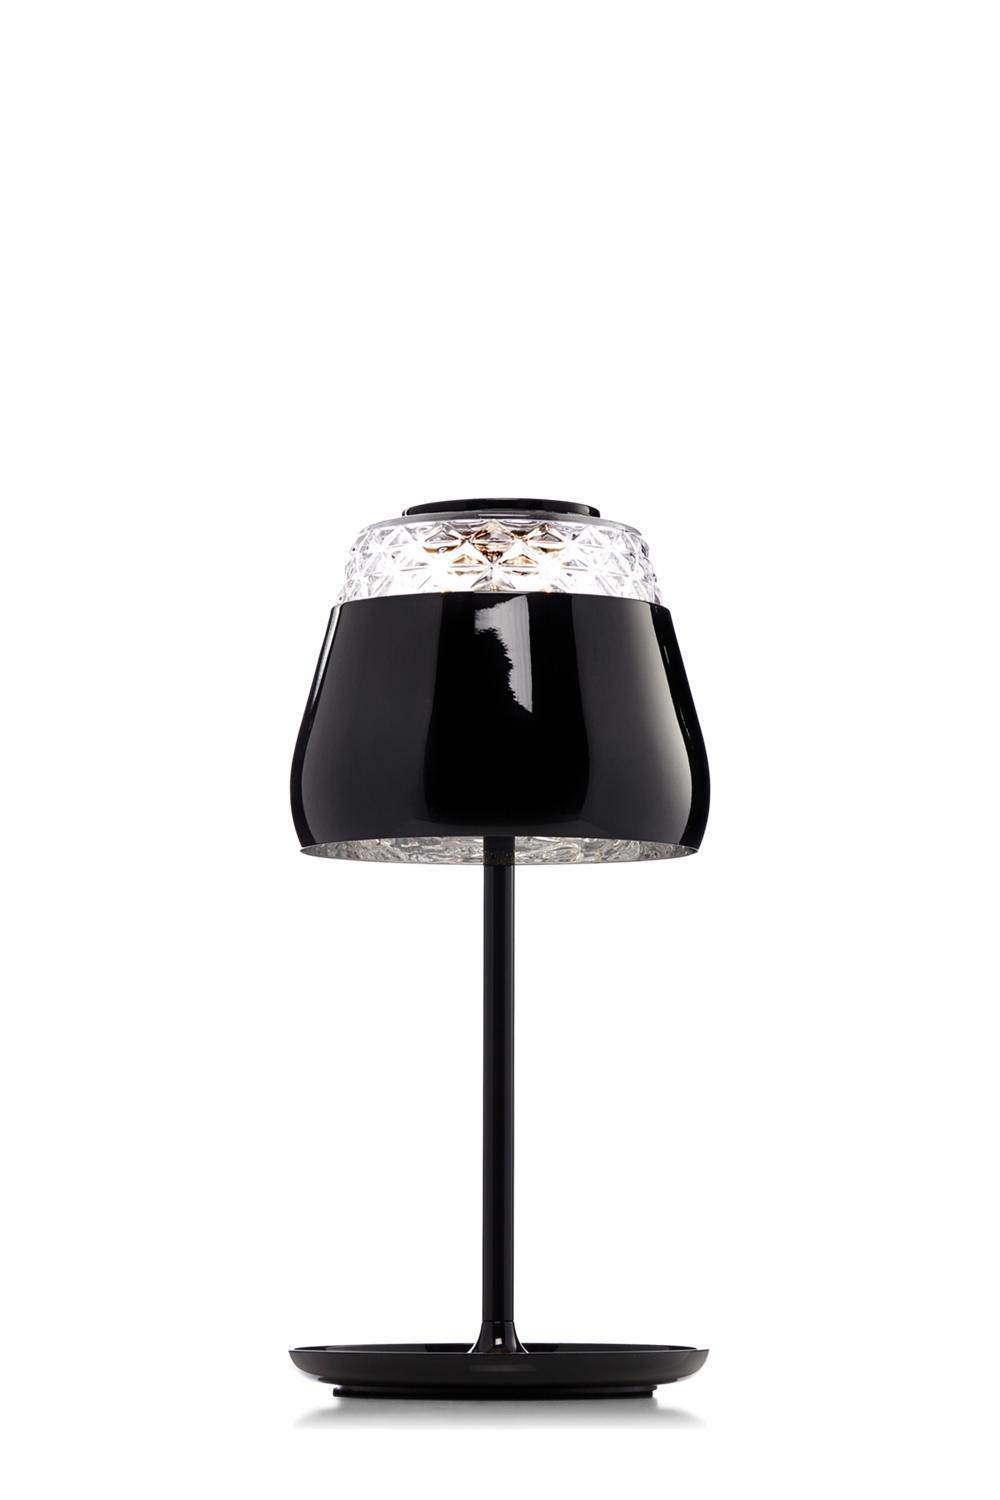 Nordic Modern Design Luxury Bed Side Table Lamp